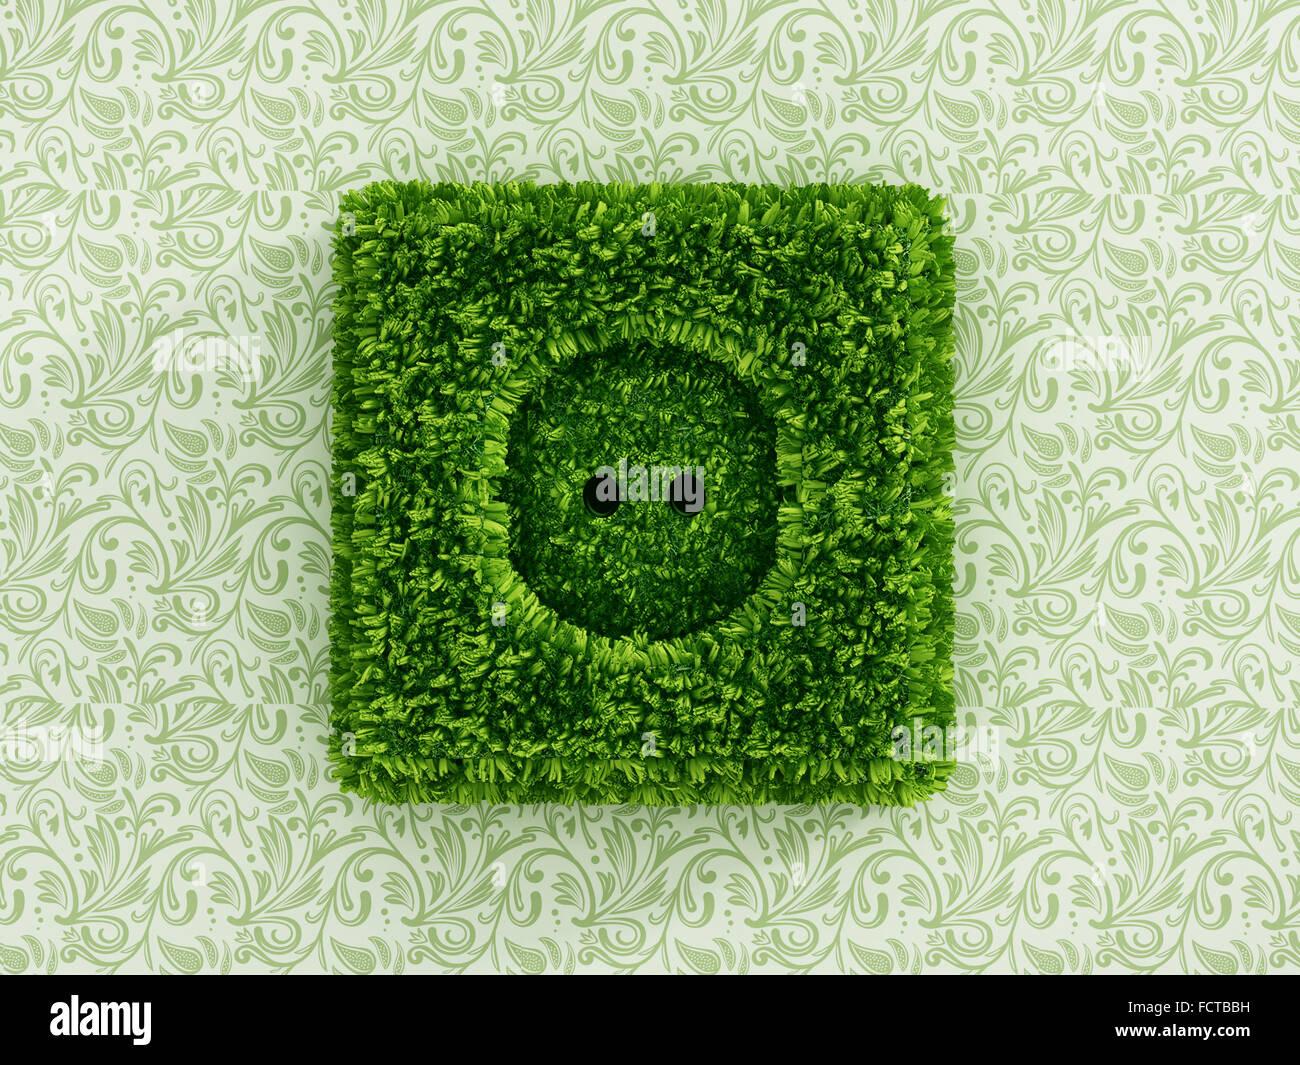 Power outlet covered with green grass Stock Photo